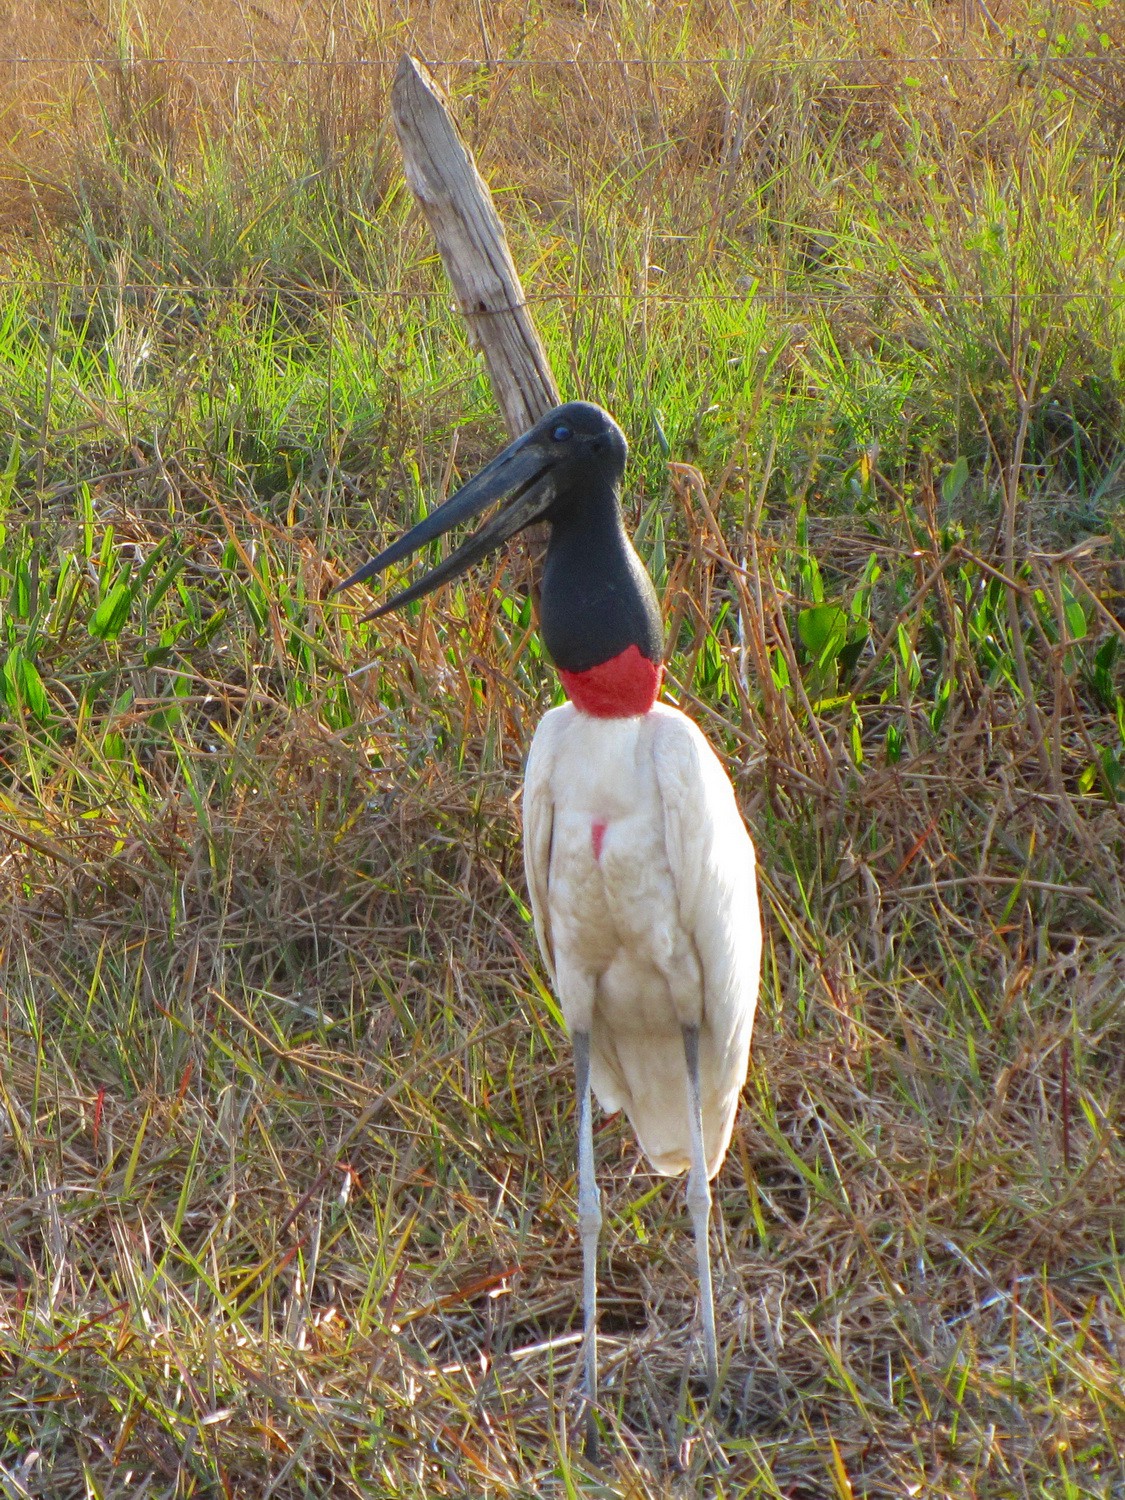 Another Jaribu seen from the beginning of the Transpantaneira, the street into the inner Pantanal